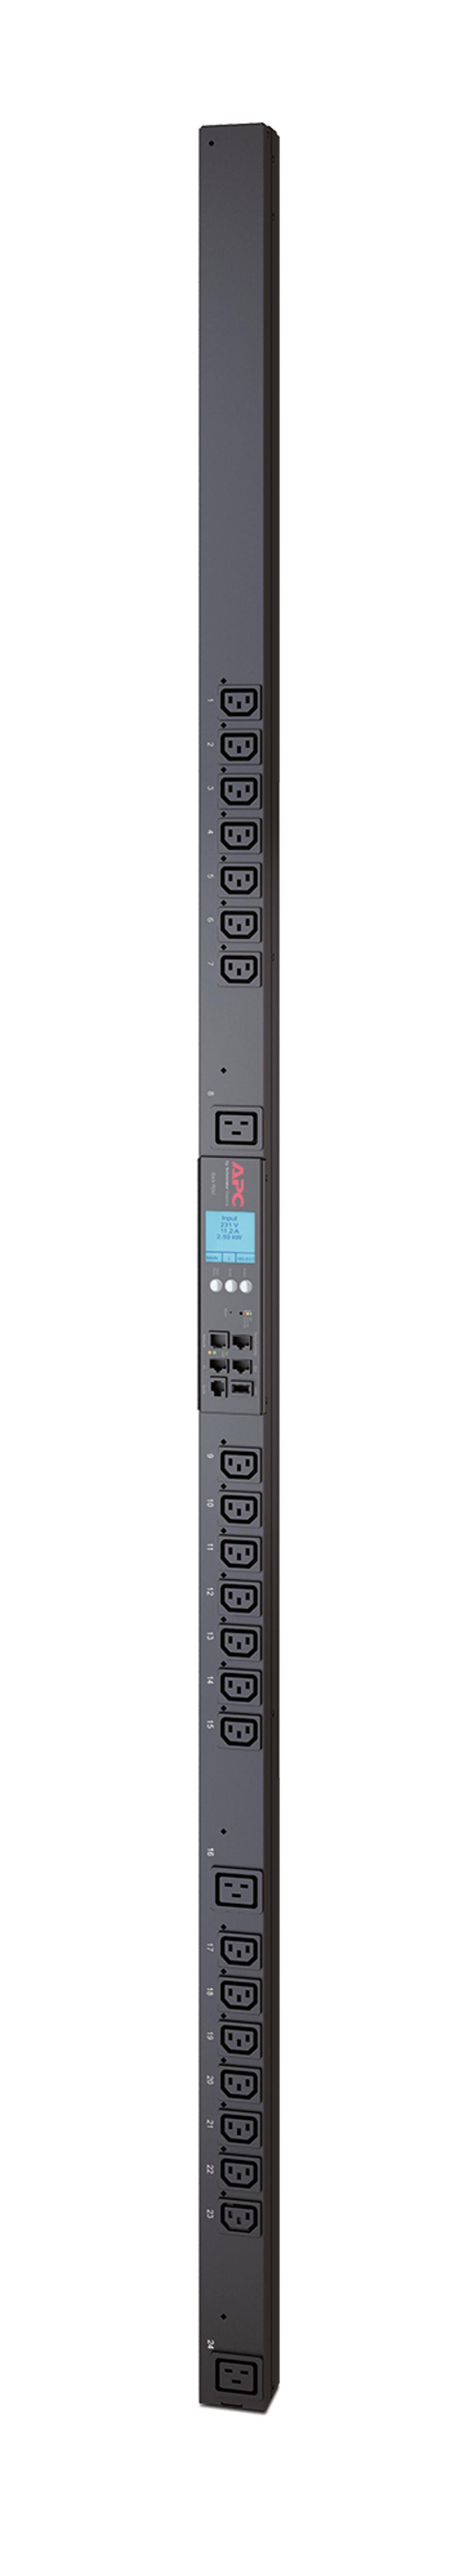 APC Rack PDU 2G Metered By Outlet /W Switching 0U 16A 240V